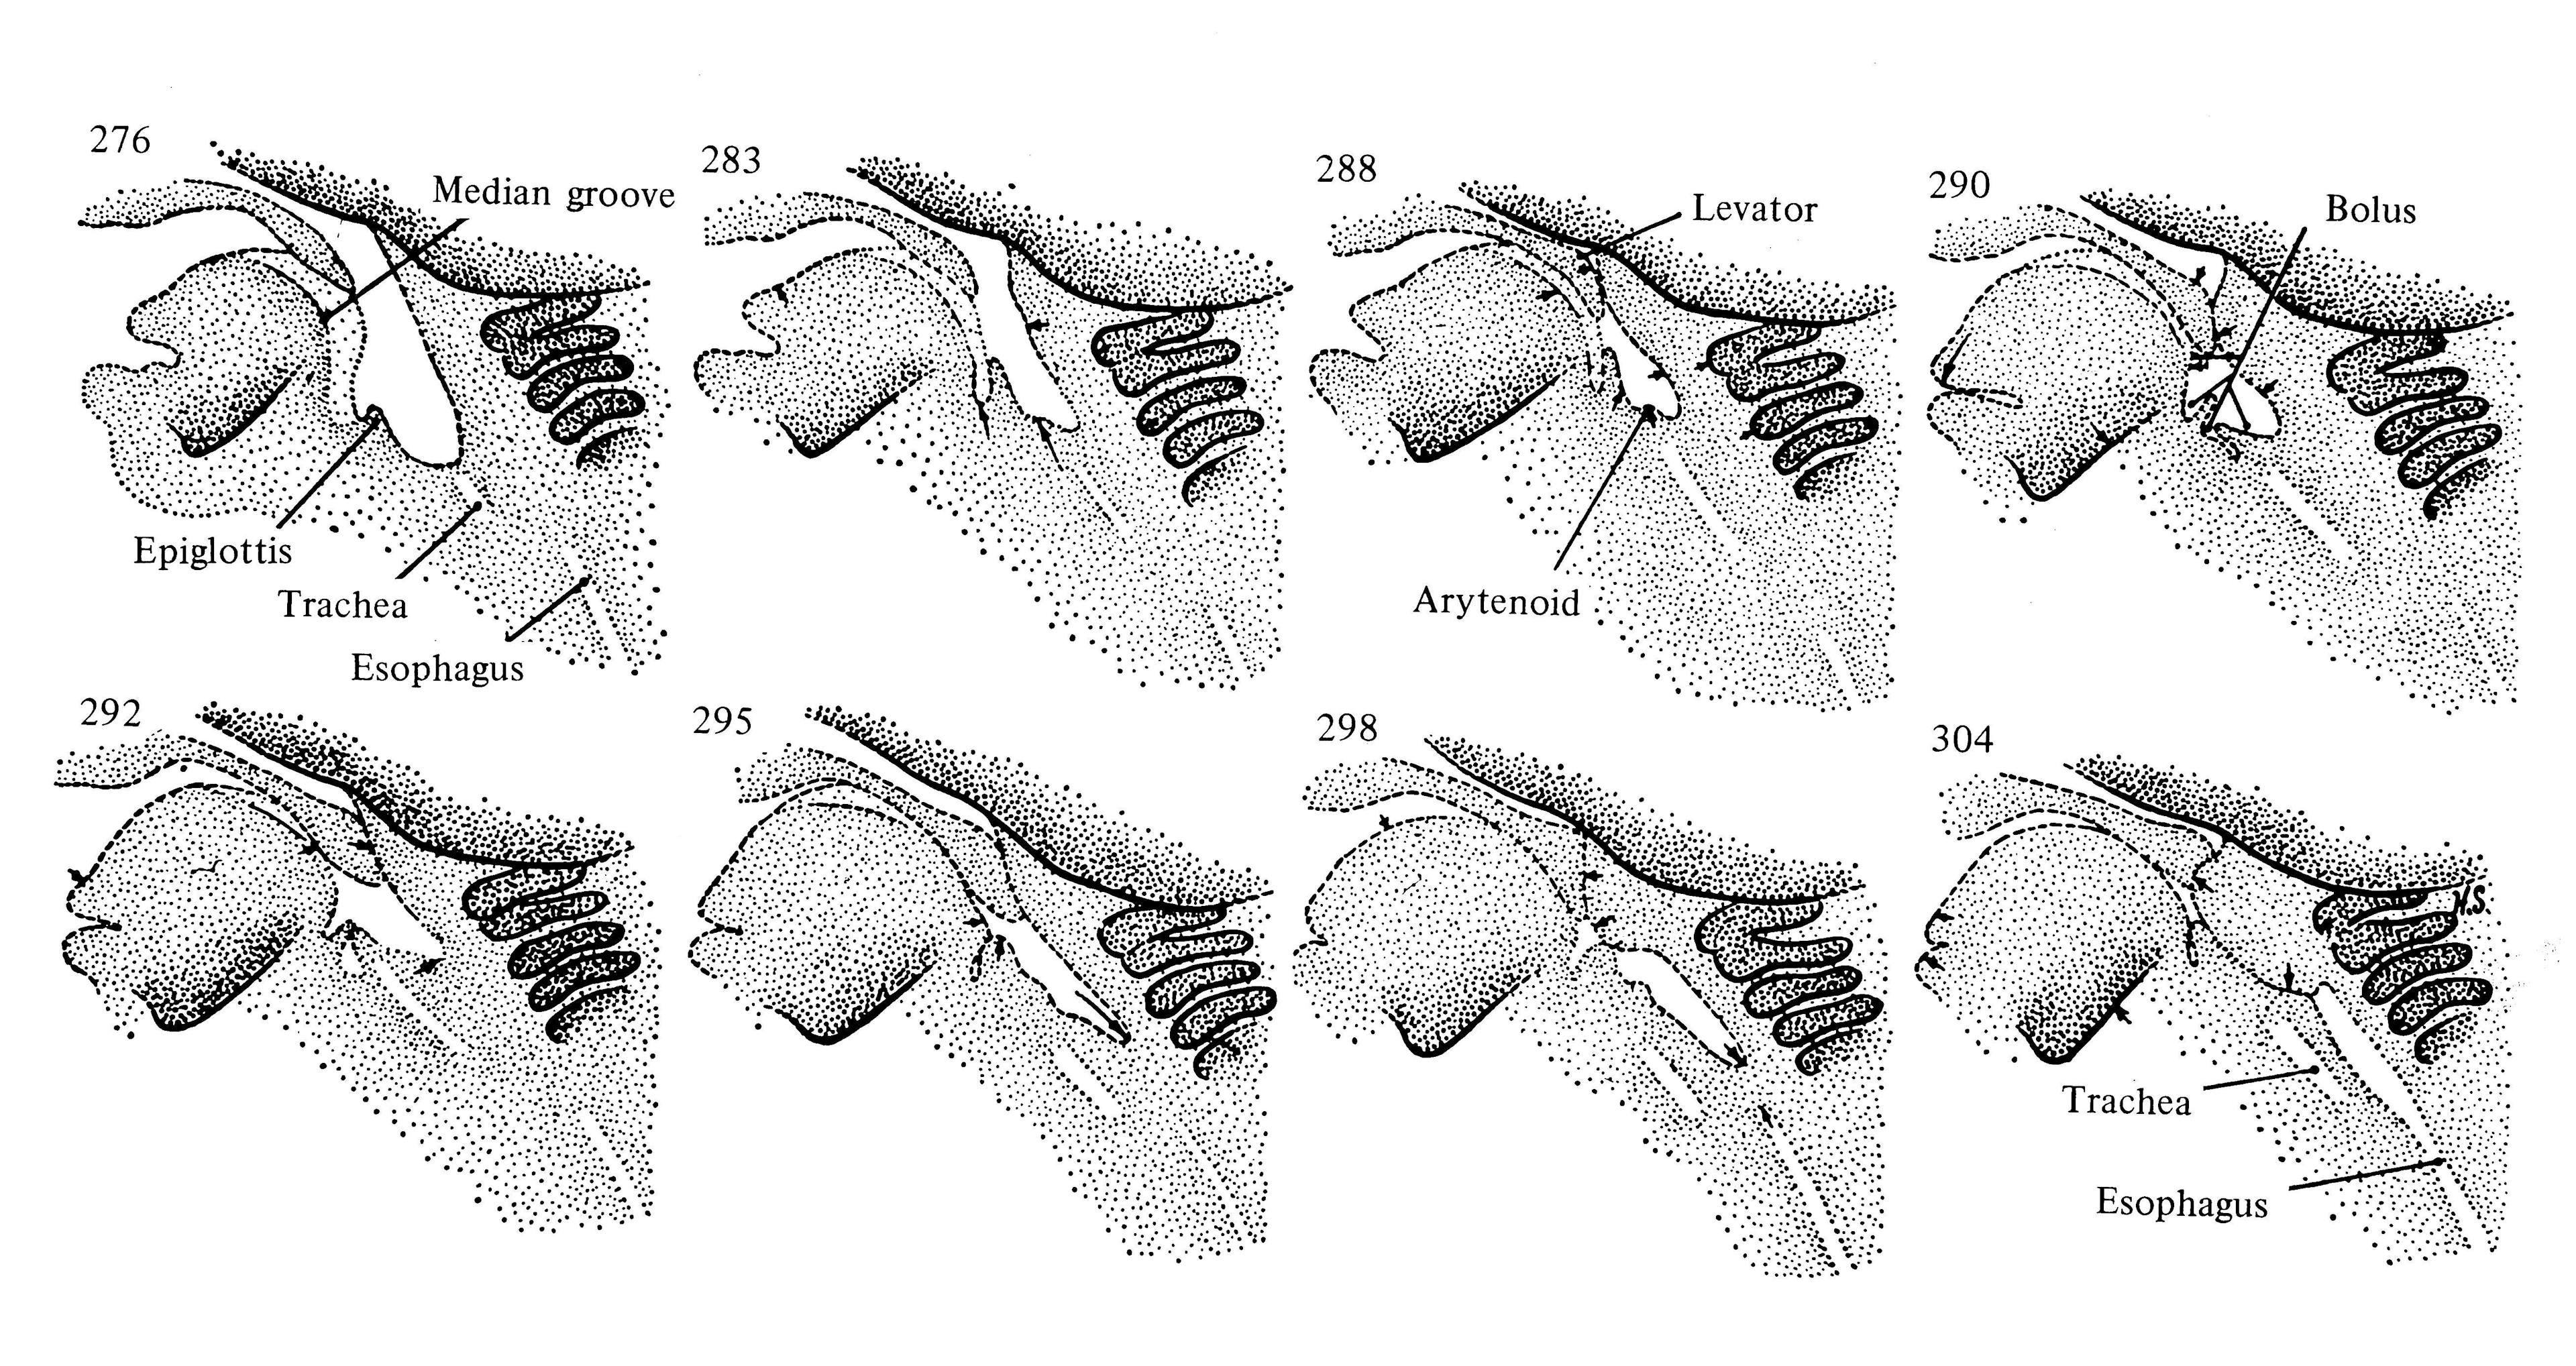 Figure 2. Sequential images from cineradiological recordings showing the movement of the pharyngeal/laryngeal structures during newborn infant swallowing. Used with permission from Bosma et al. (1966).11 Note that in these images the epiglottis is shown to partially cover the entrance to the larynx as it does in adults, and not to interlock with the soft palate. 